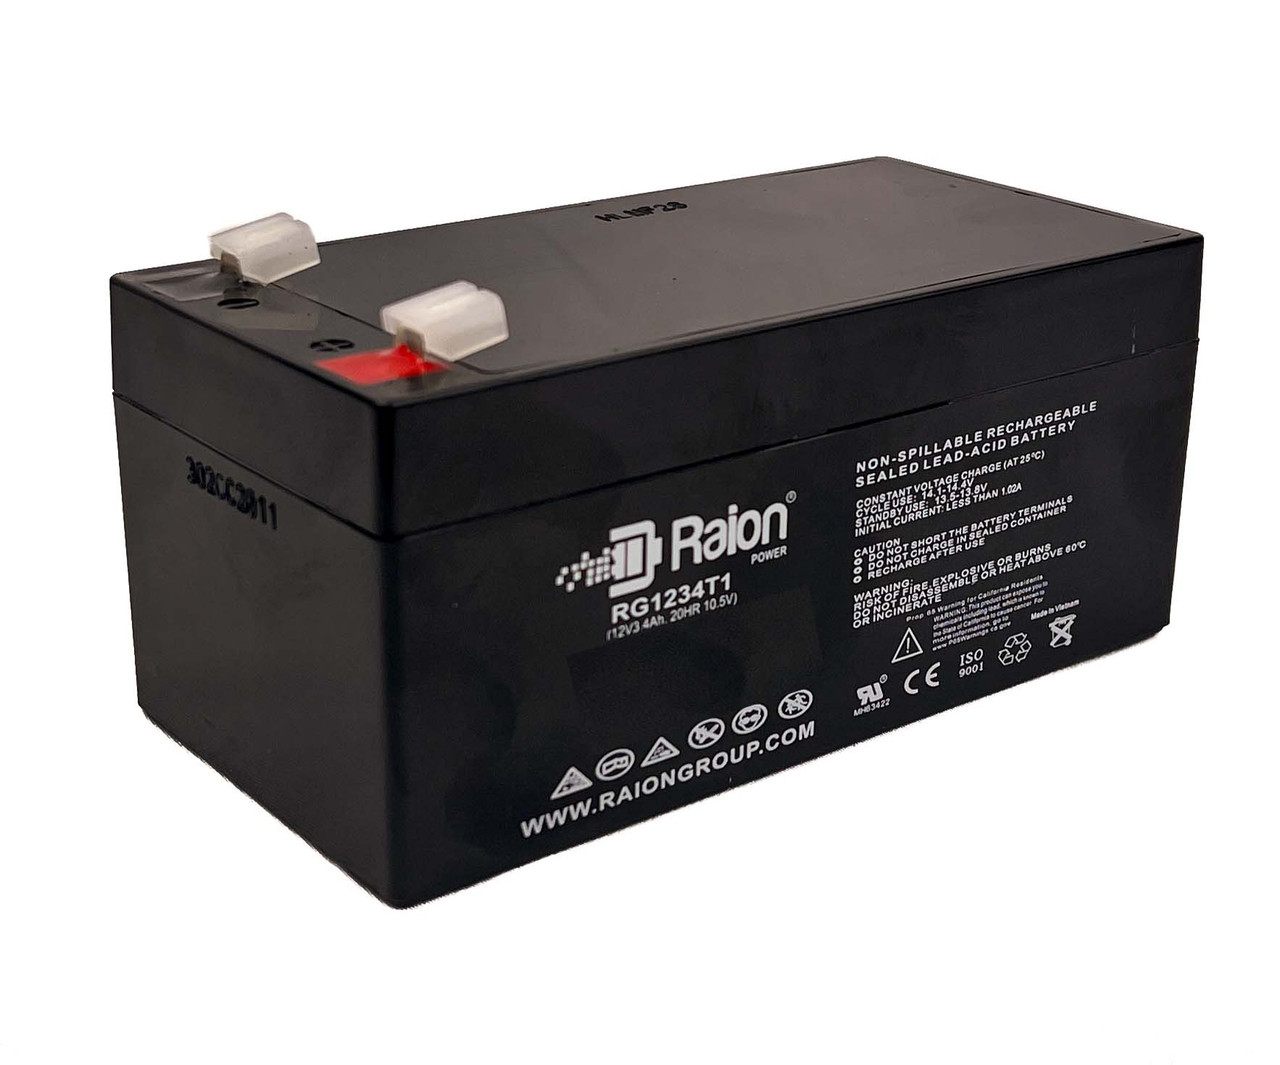 Raion Power 12V 3.4Ah Non-Spillable Replacement Battery for Narco Fabius GS